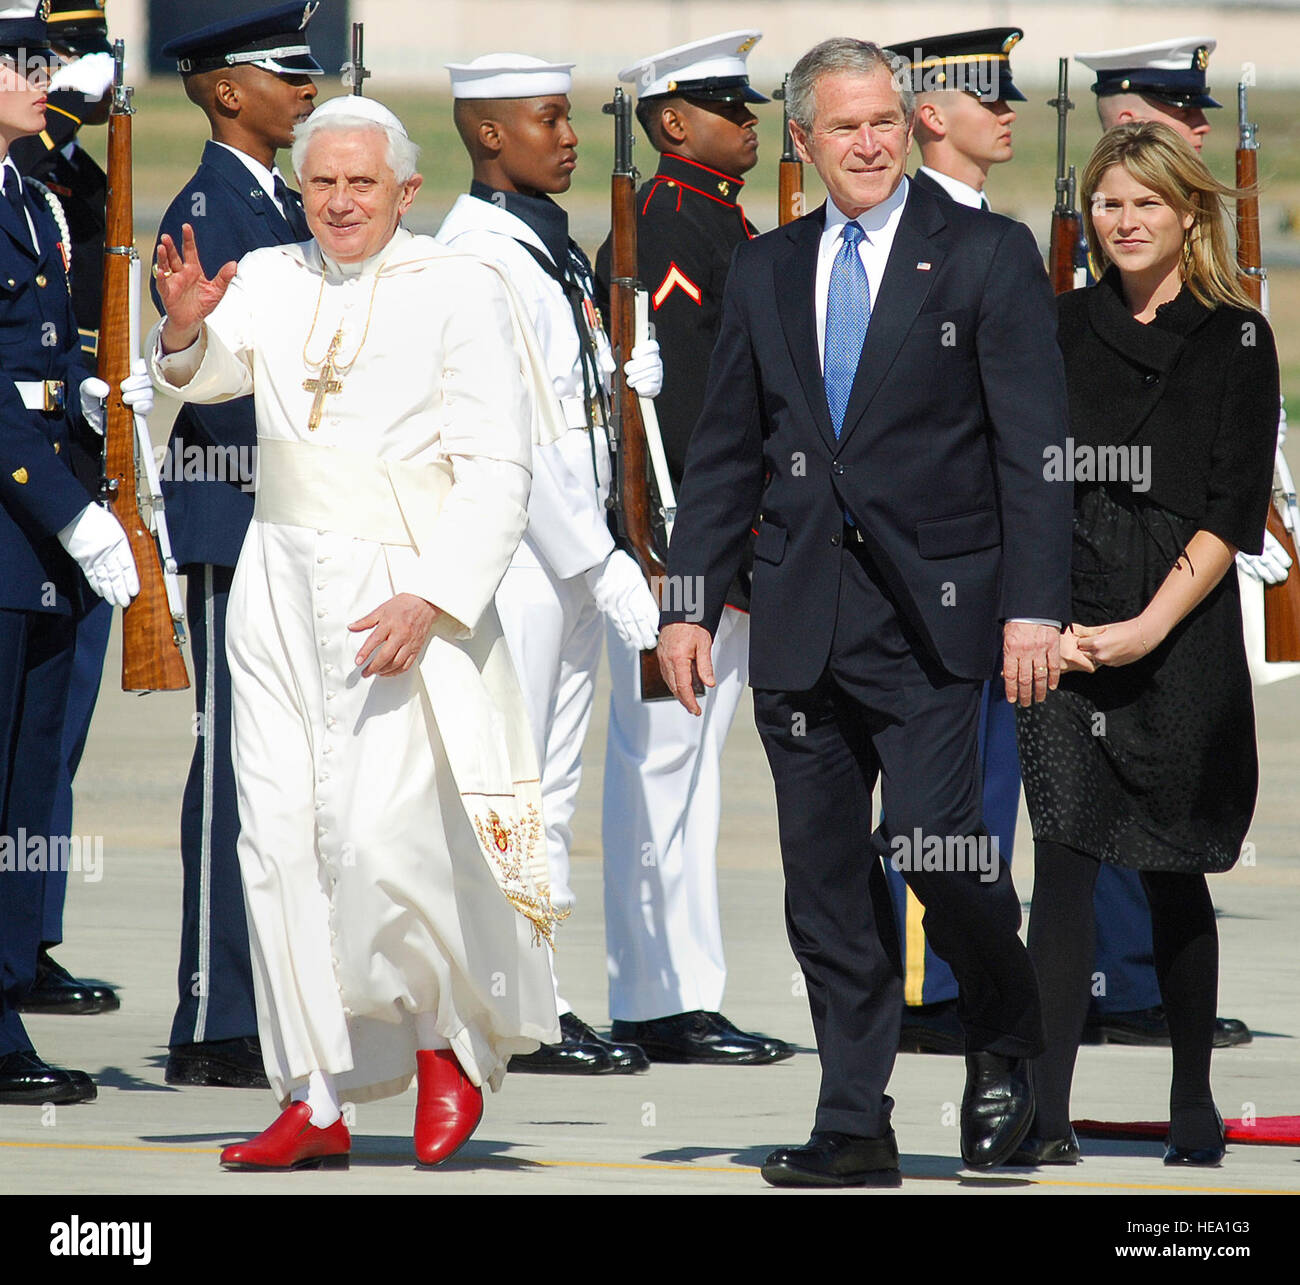 Pope Benedict XVI is greeted by President George W. Bush and Laura Bush at Andrews Air Force Base, Md., to begin his weeklong trip to the United States.  The Pontiff, selected as the 265th pope on April 19, 2005, will meet with the President at the White House, address the presidents of Roman Catholic Colleges and Universities, and hold mass at the Nationals Park in Washing to D.C. and Yankee Stadium in New York City.   Tech Sgt. Suzanne M. Day)(Released) Stock Photo